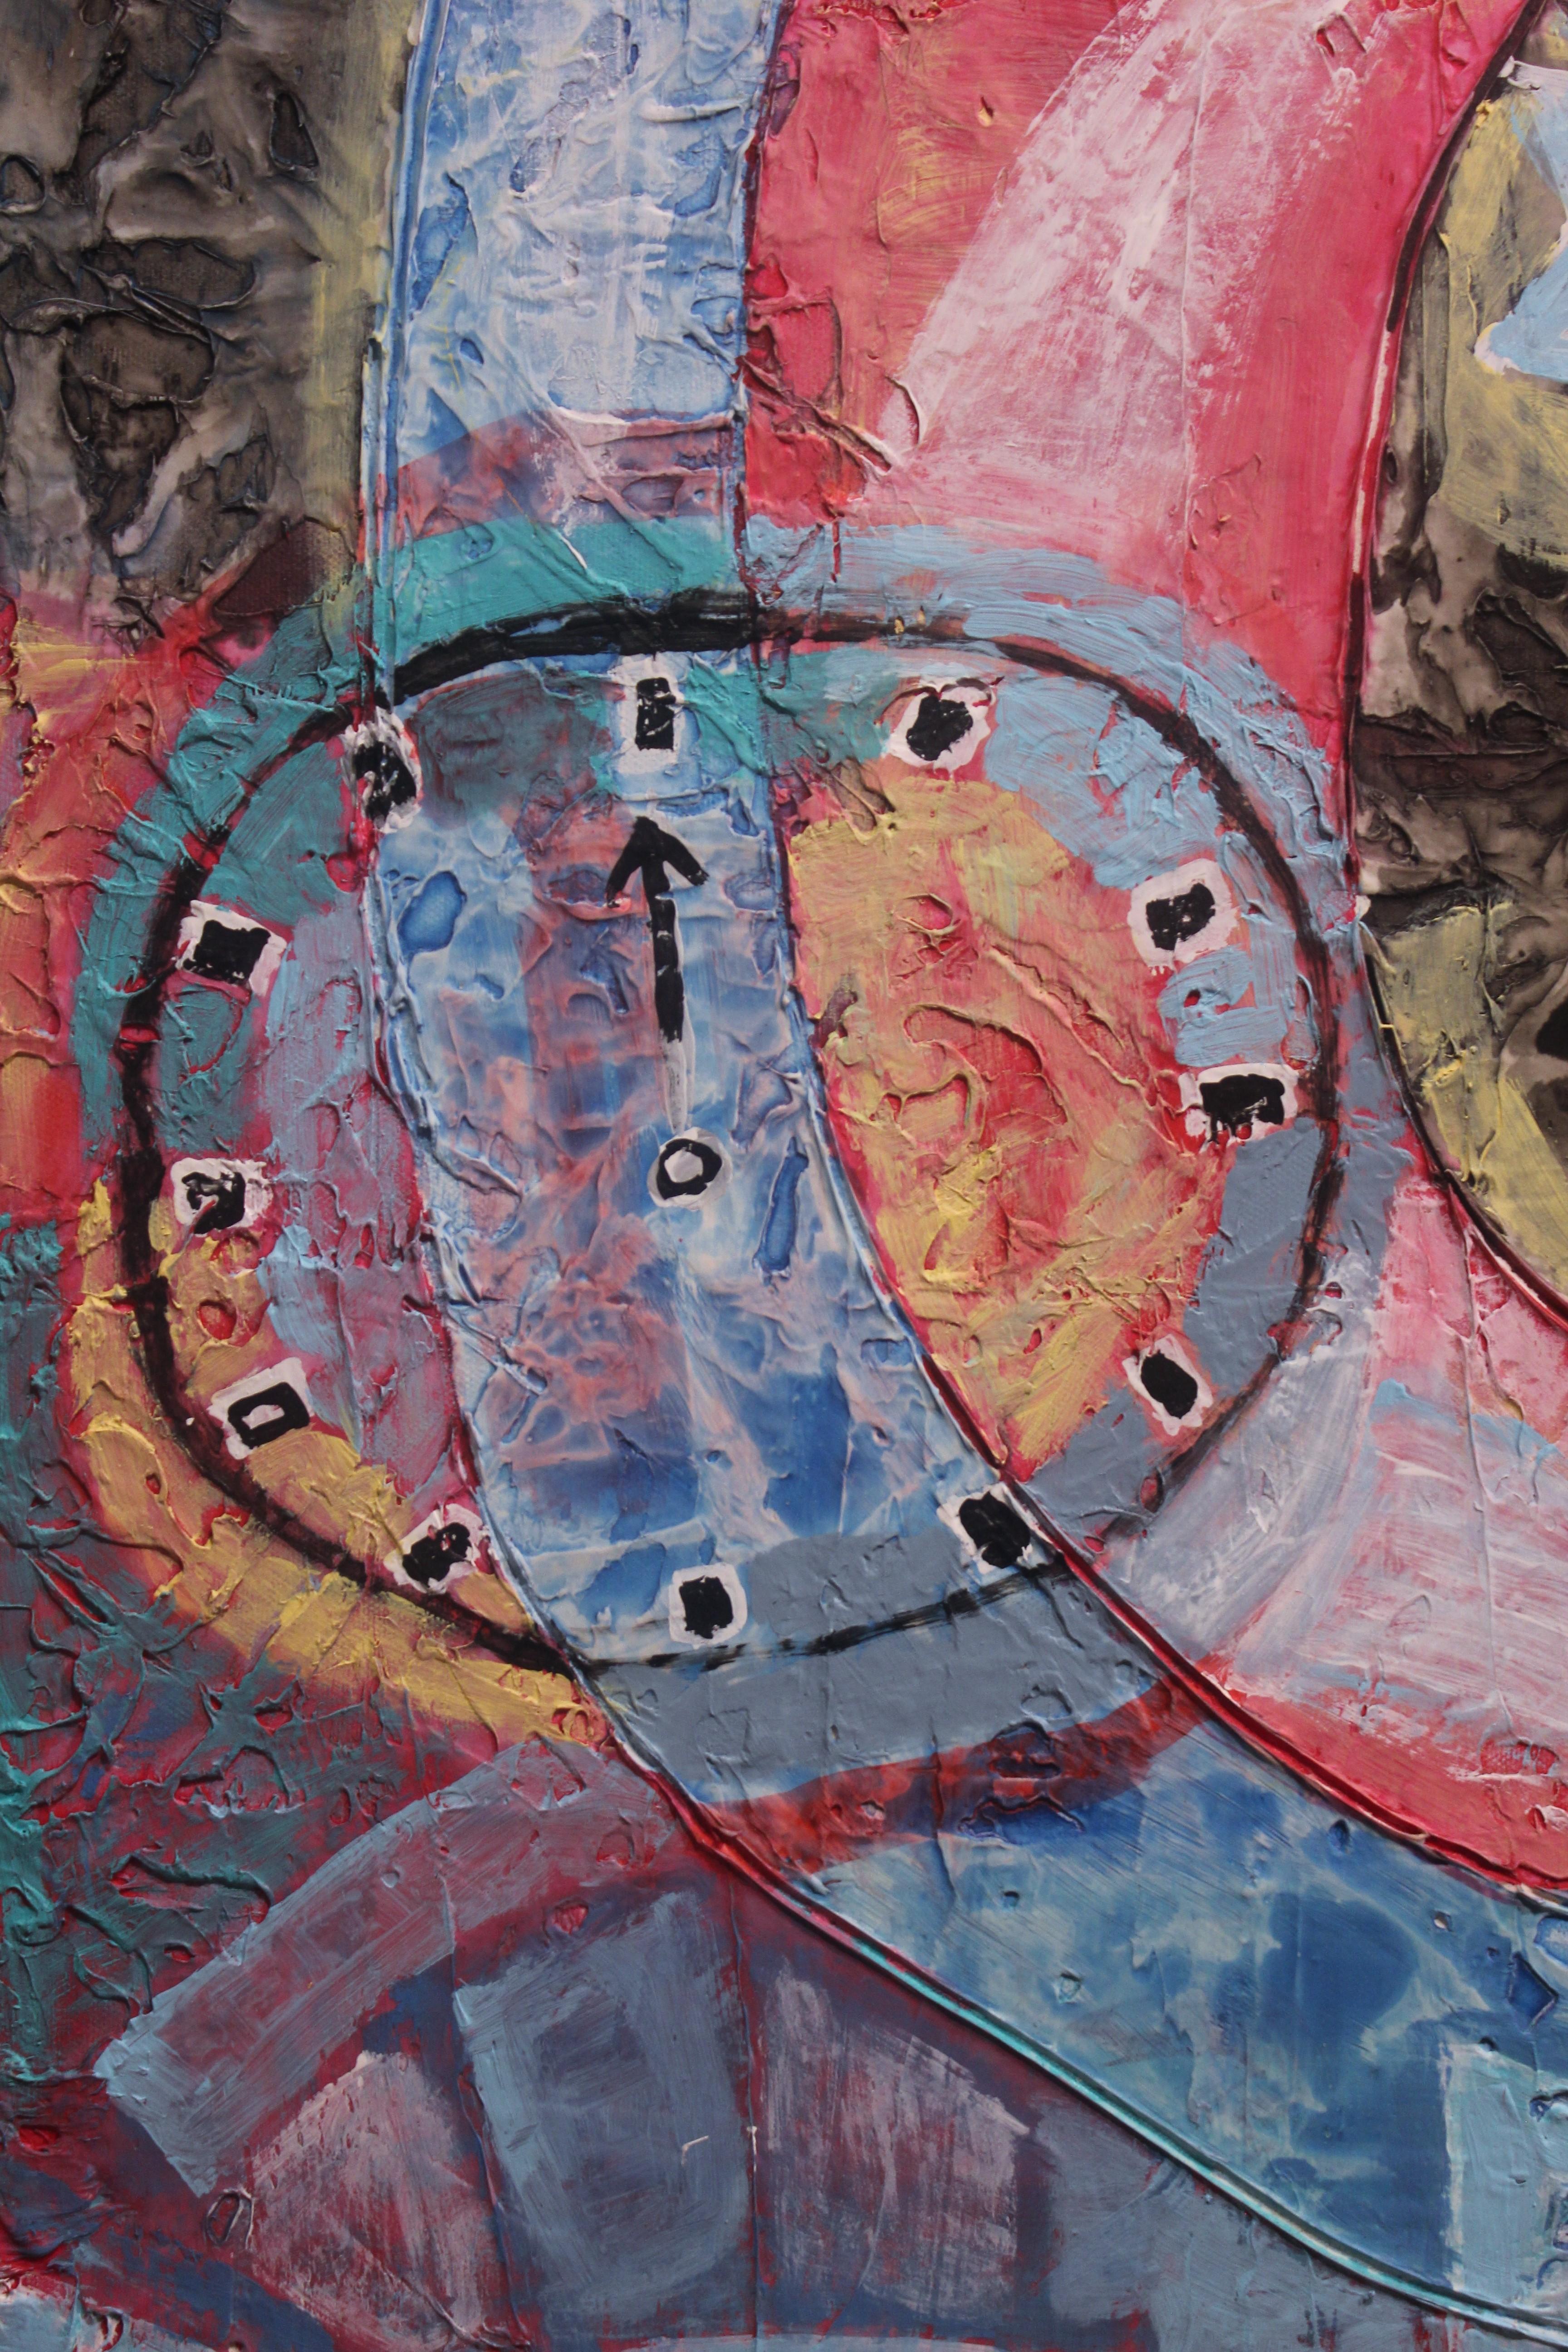 Abstraktes surrealistisches rot-blaues Gemälde „Time Cycle“ – Painting von Paul Reeves